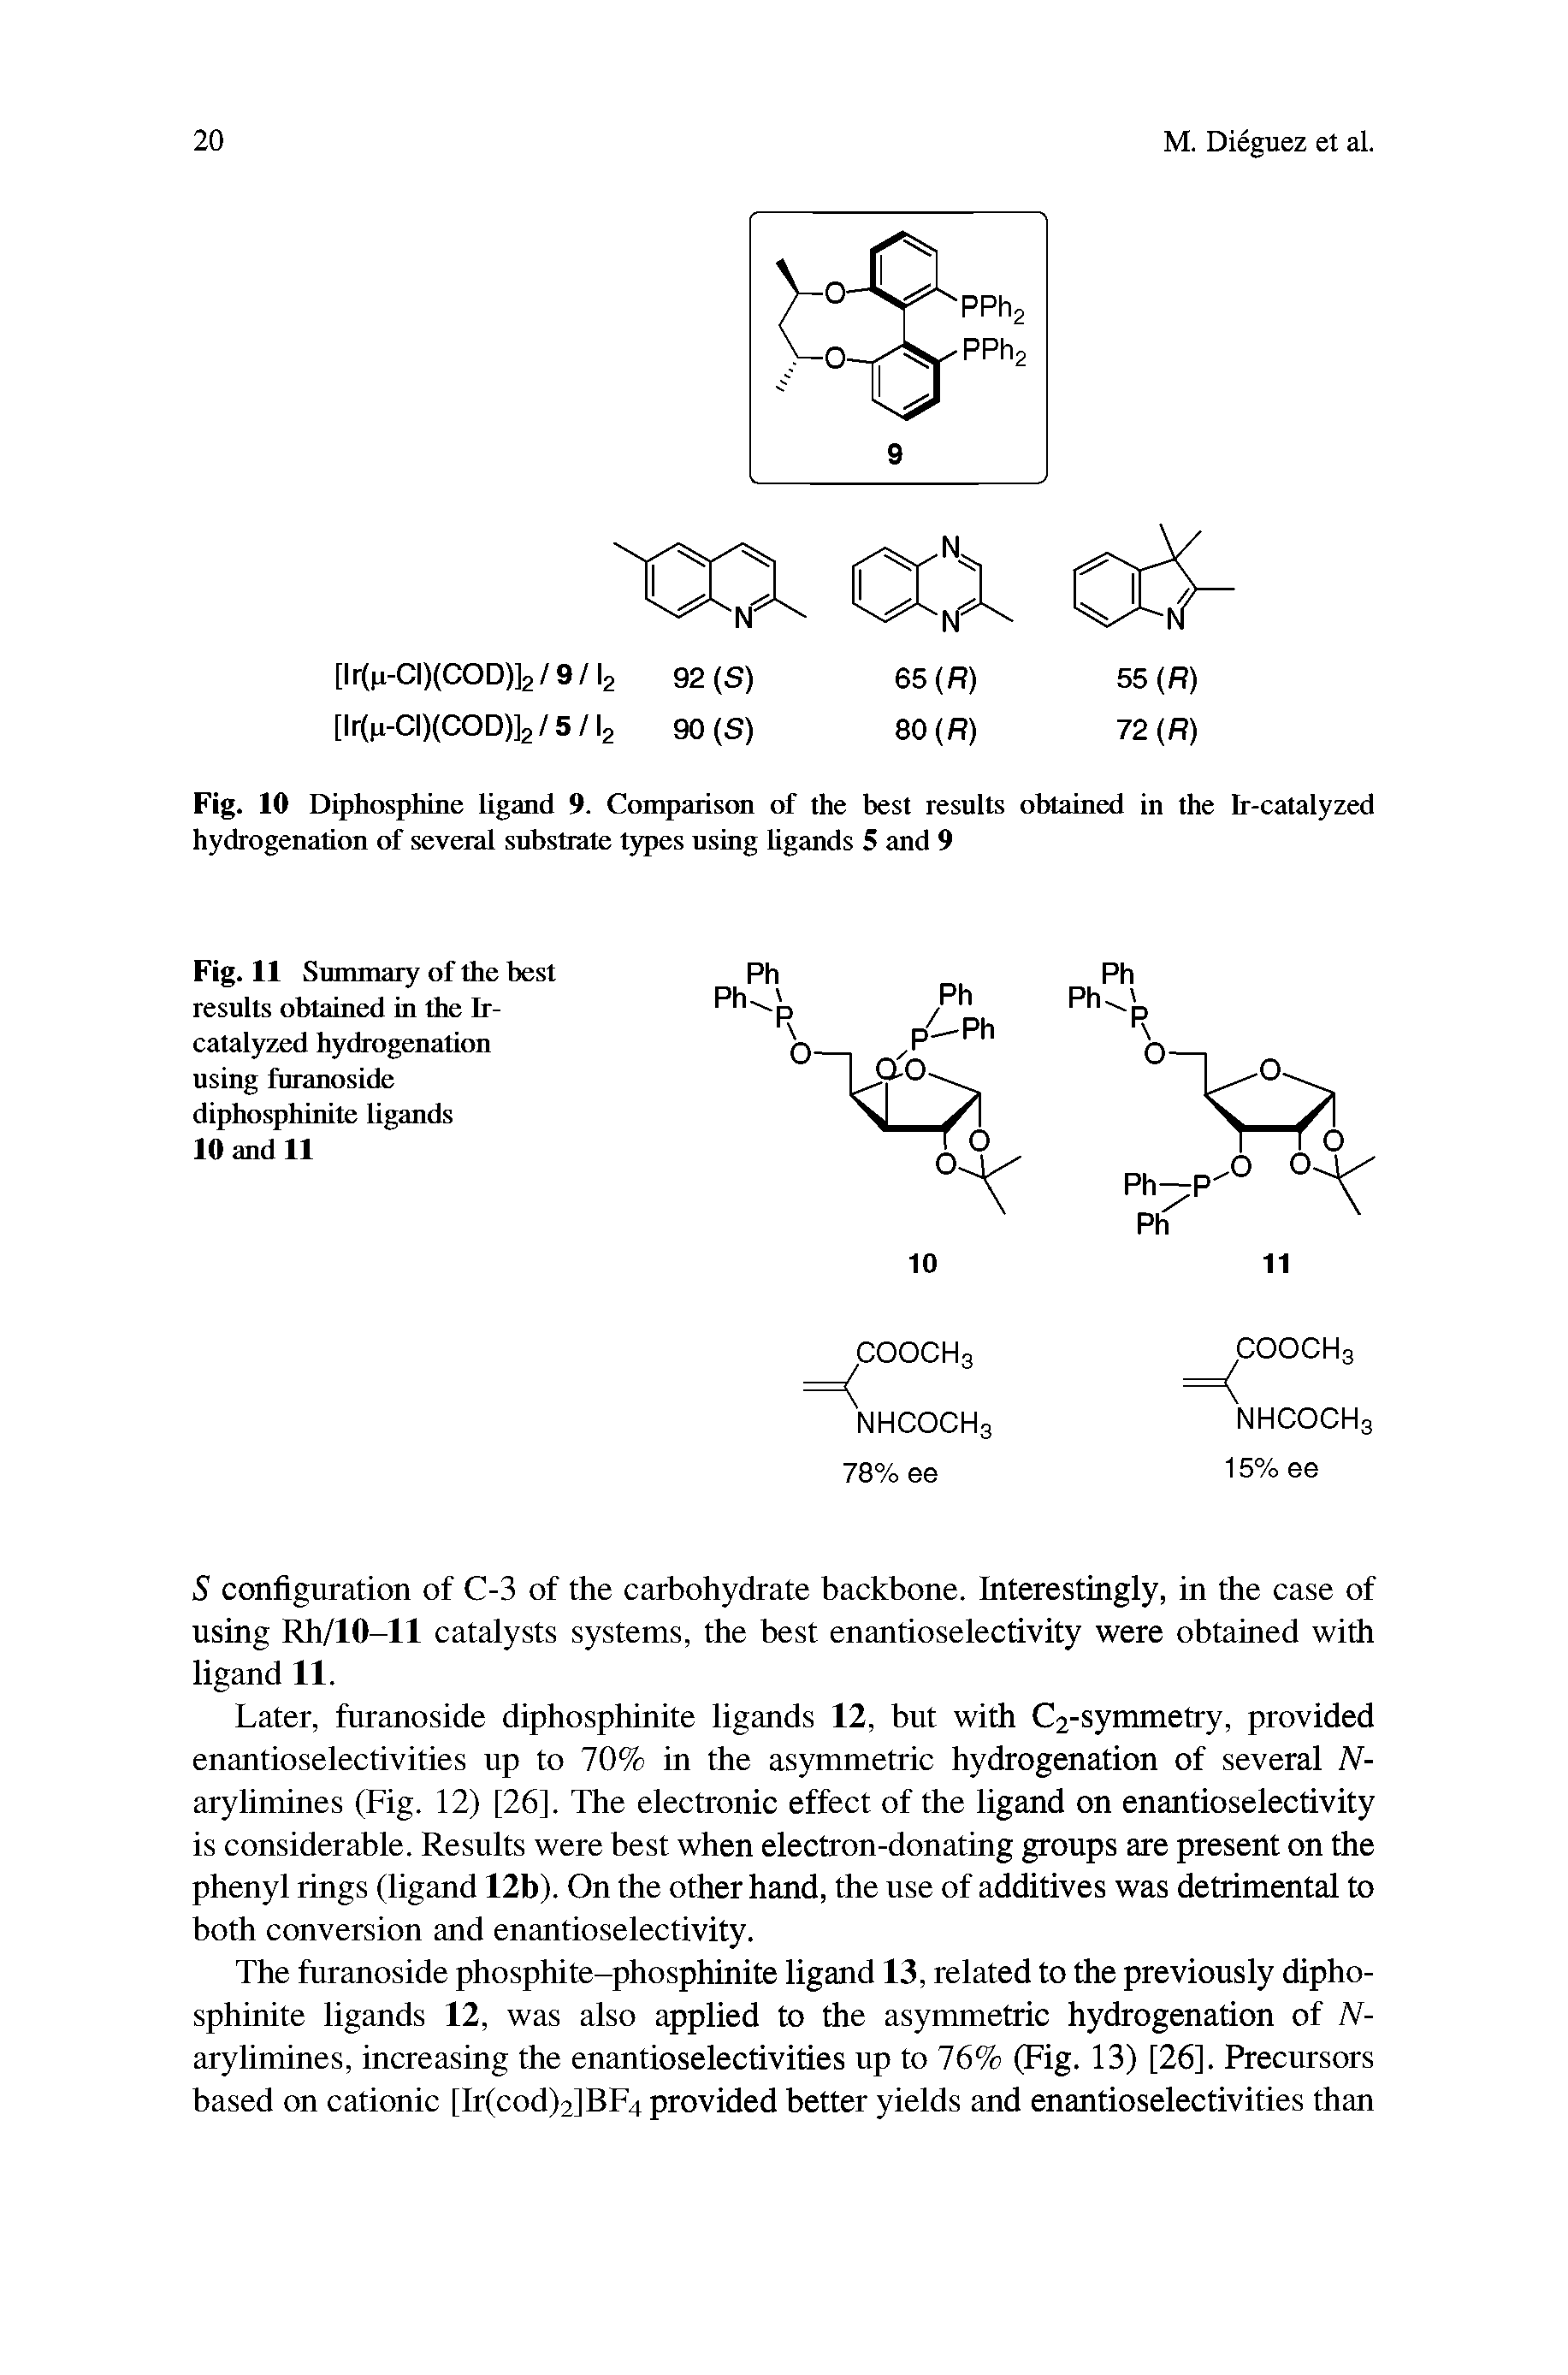 Fig. 11 Summary of the best results obtained in the Ir-catalyzed hydrogenation using furanoside diphosphinite ligands 10 and 11...